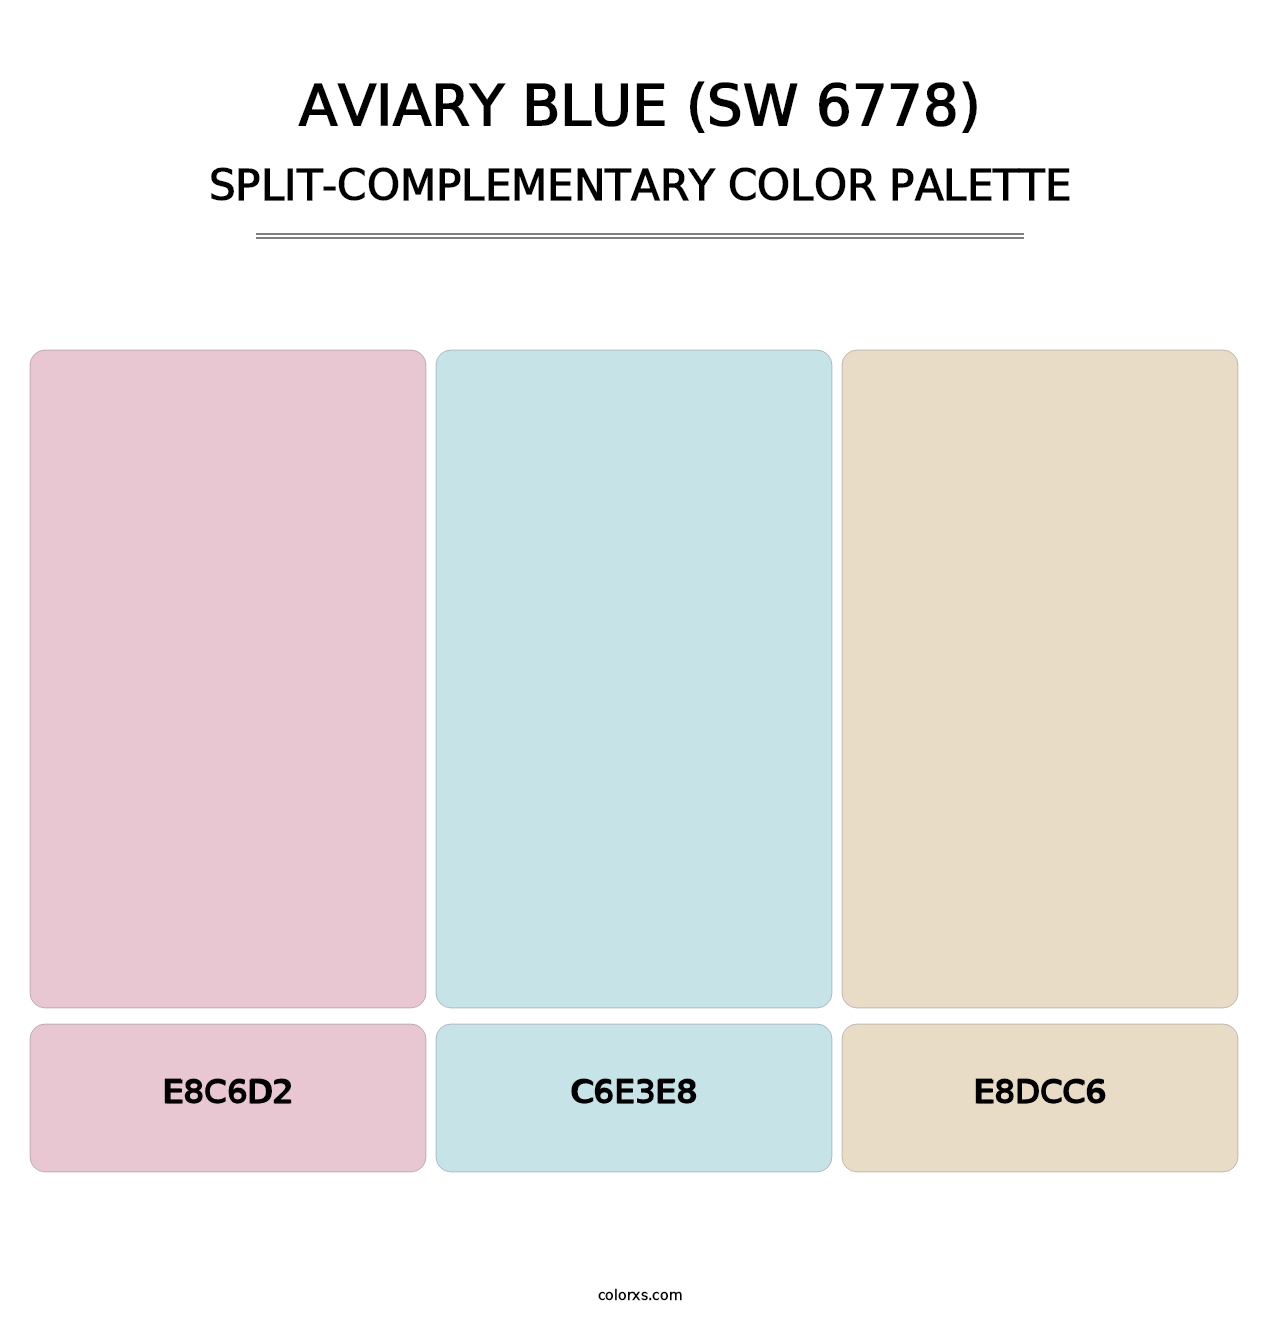 Aviary Blue (SW 6778) - Split-Complementary Color Palette